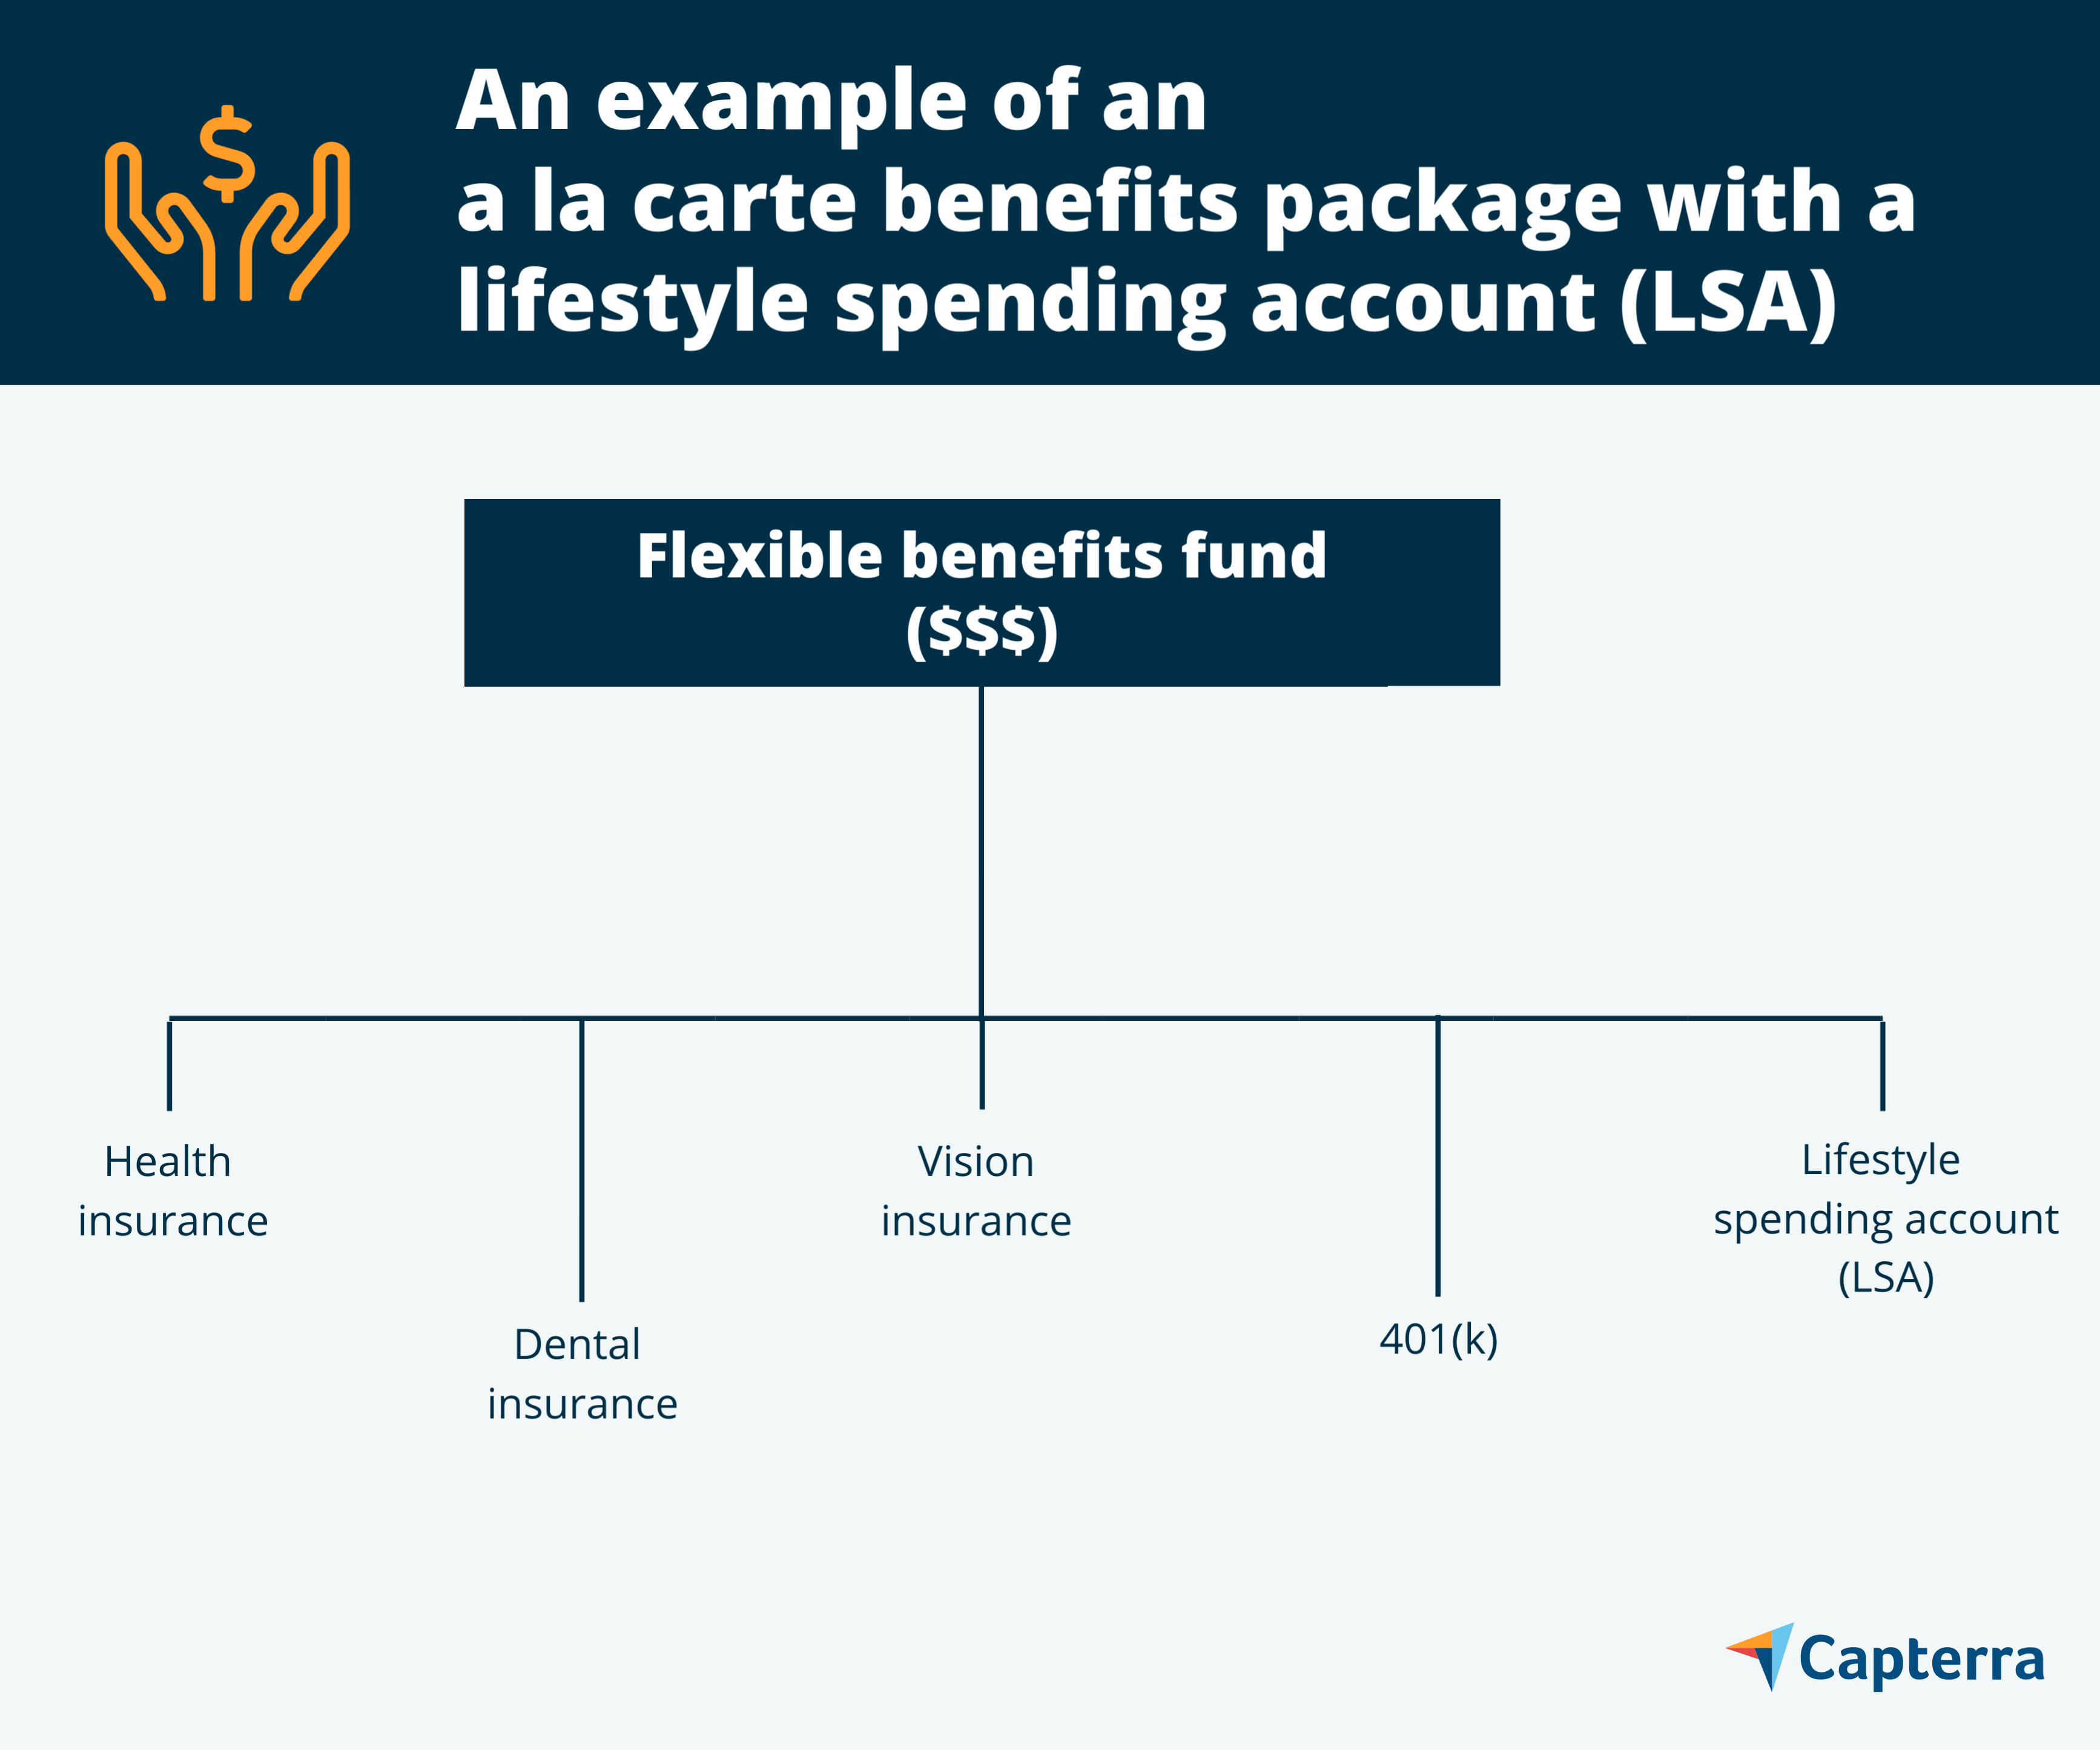 Example of a la carte with LSA benefits for the blog article "Employee Benefits Lack Choice. A New Trend Called “A La Carte” Benefits Can Help."